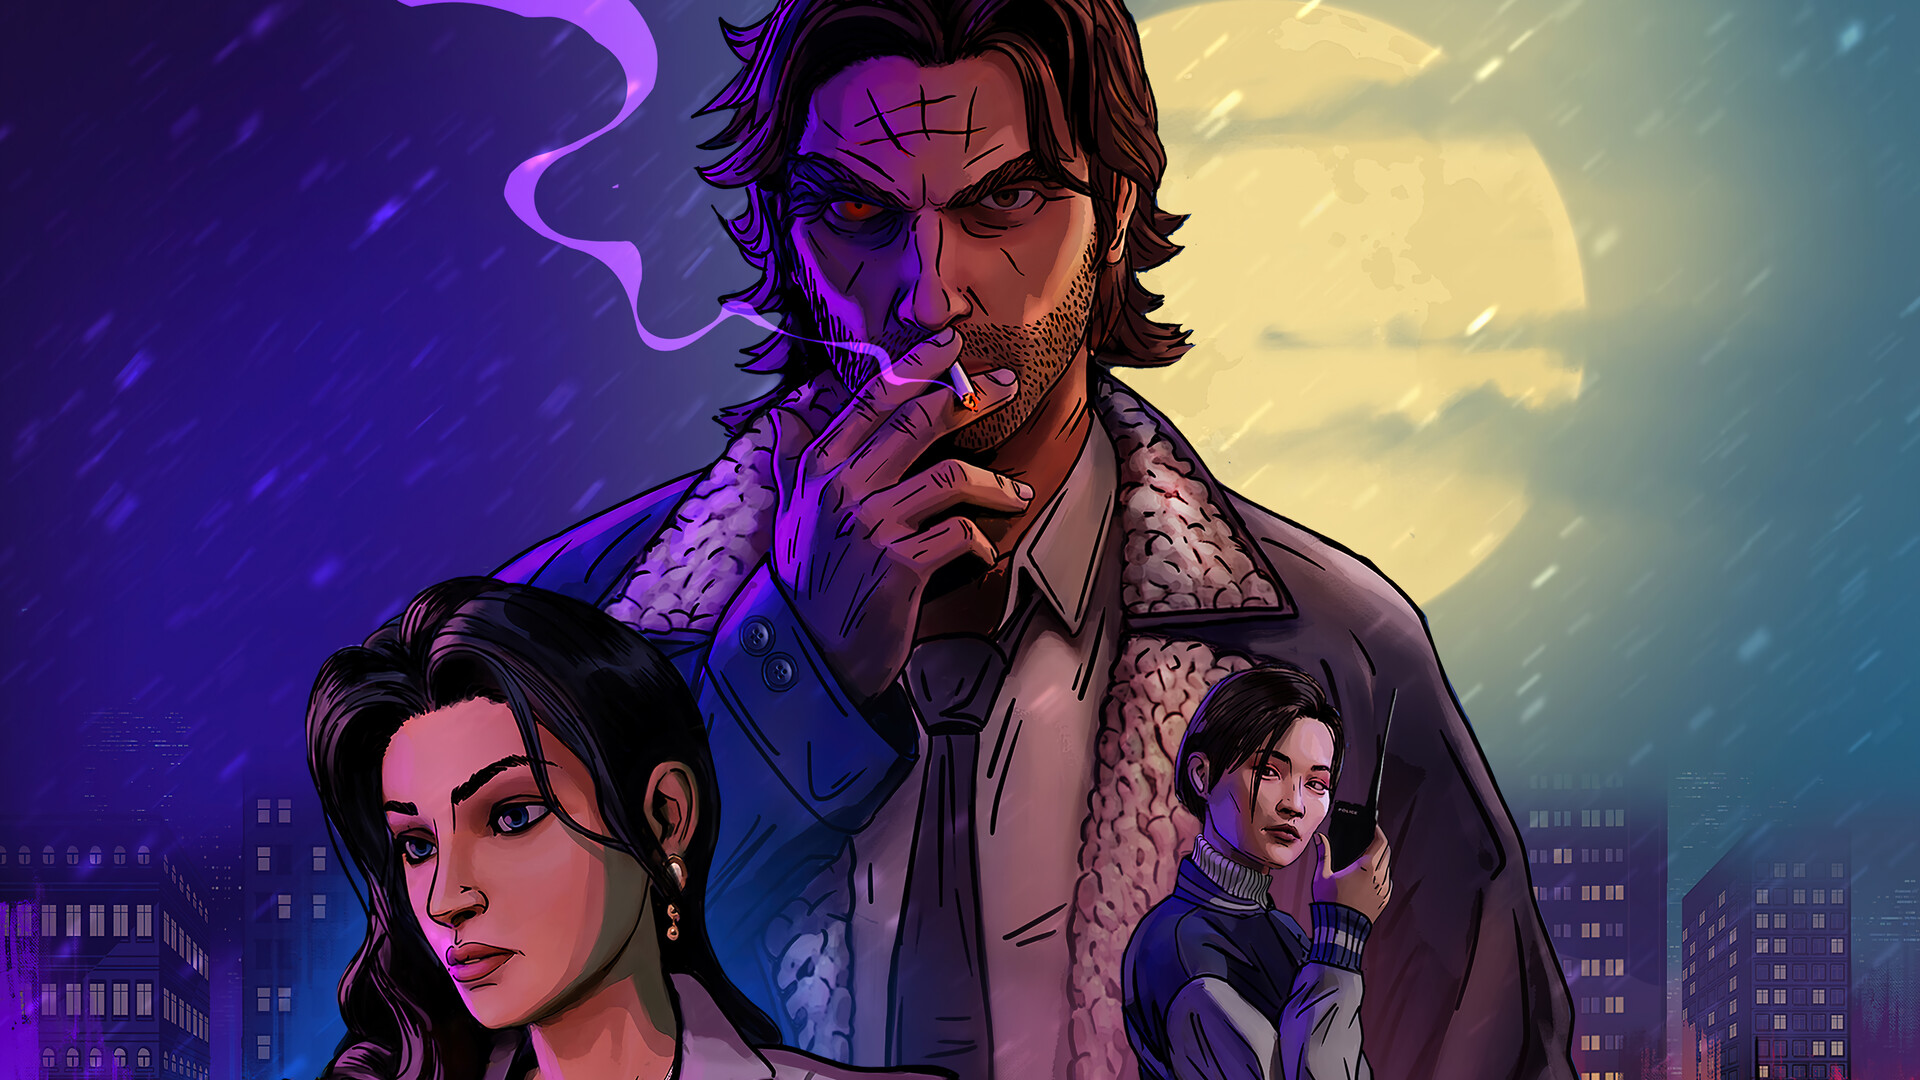 General 1920x1080 The Wolf Among Us The Big Bad Wolf Telltale Games PC gaming video games A Telltale Games Series smoking full moon